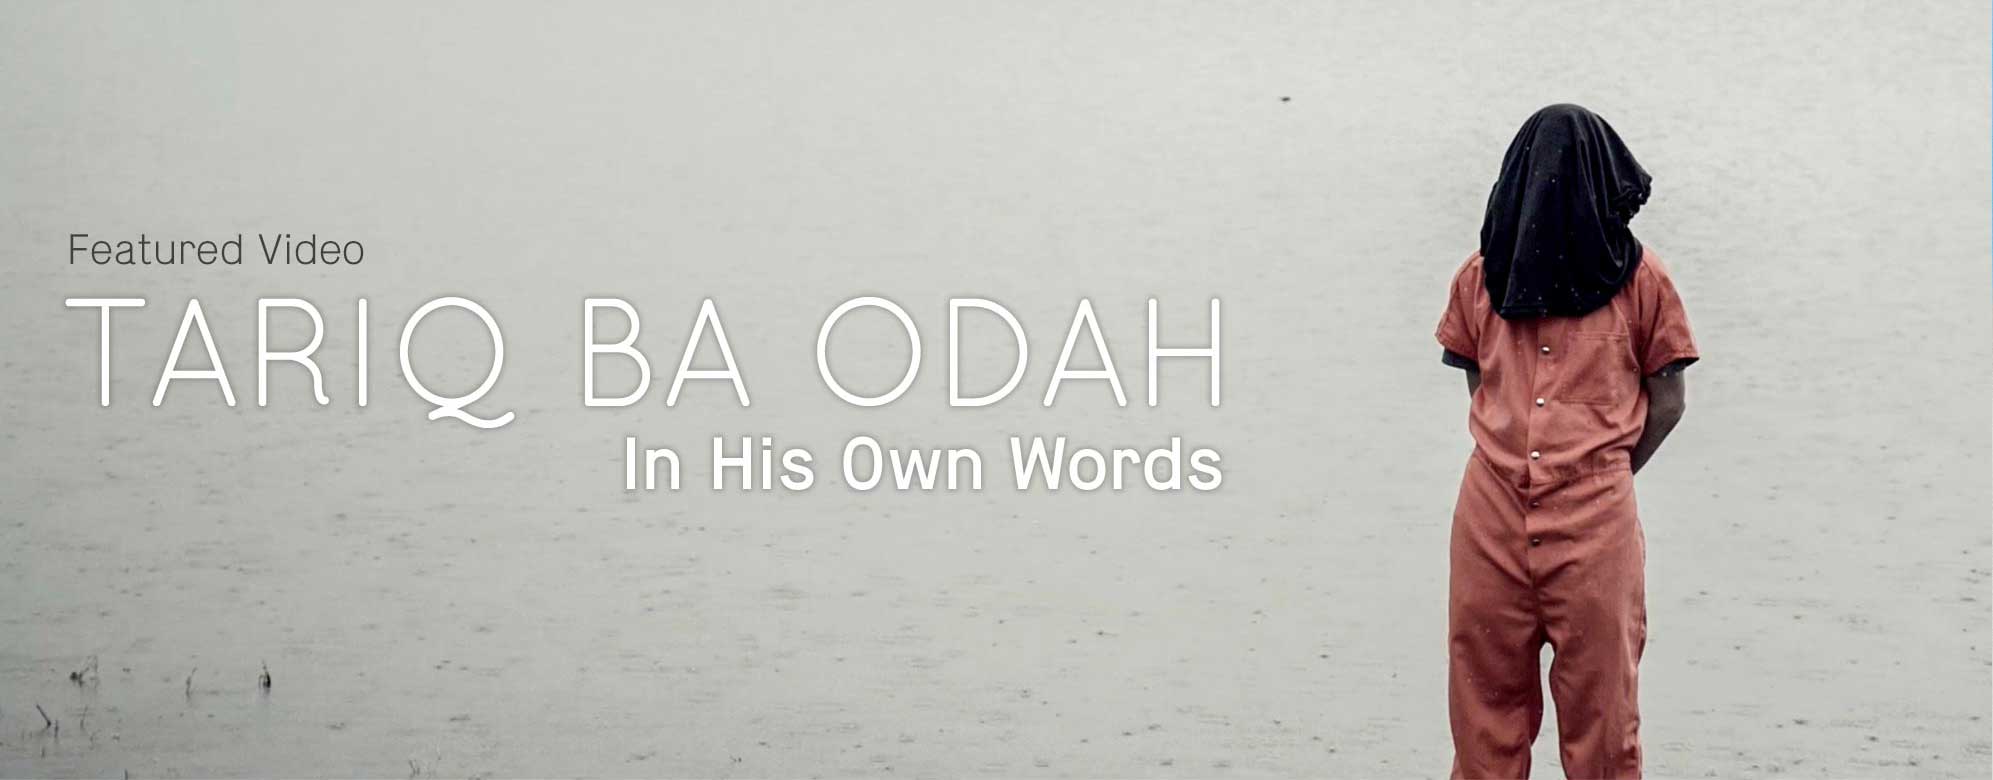 Featured Video: Tariq ba Odah in His Own Words